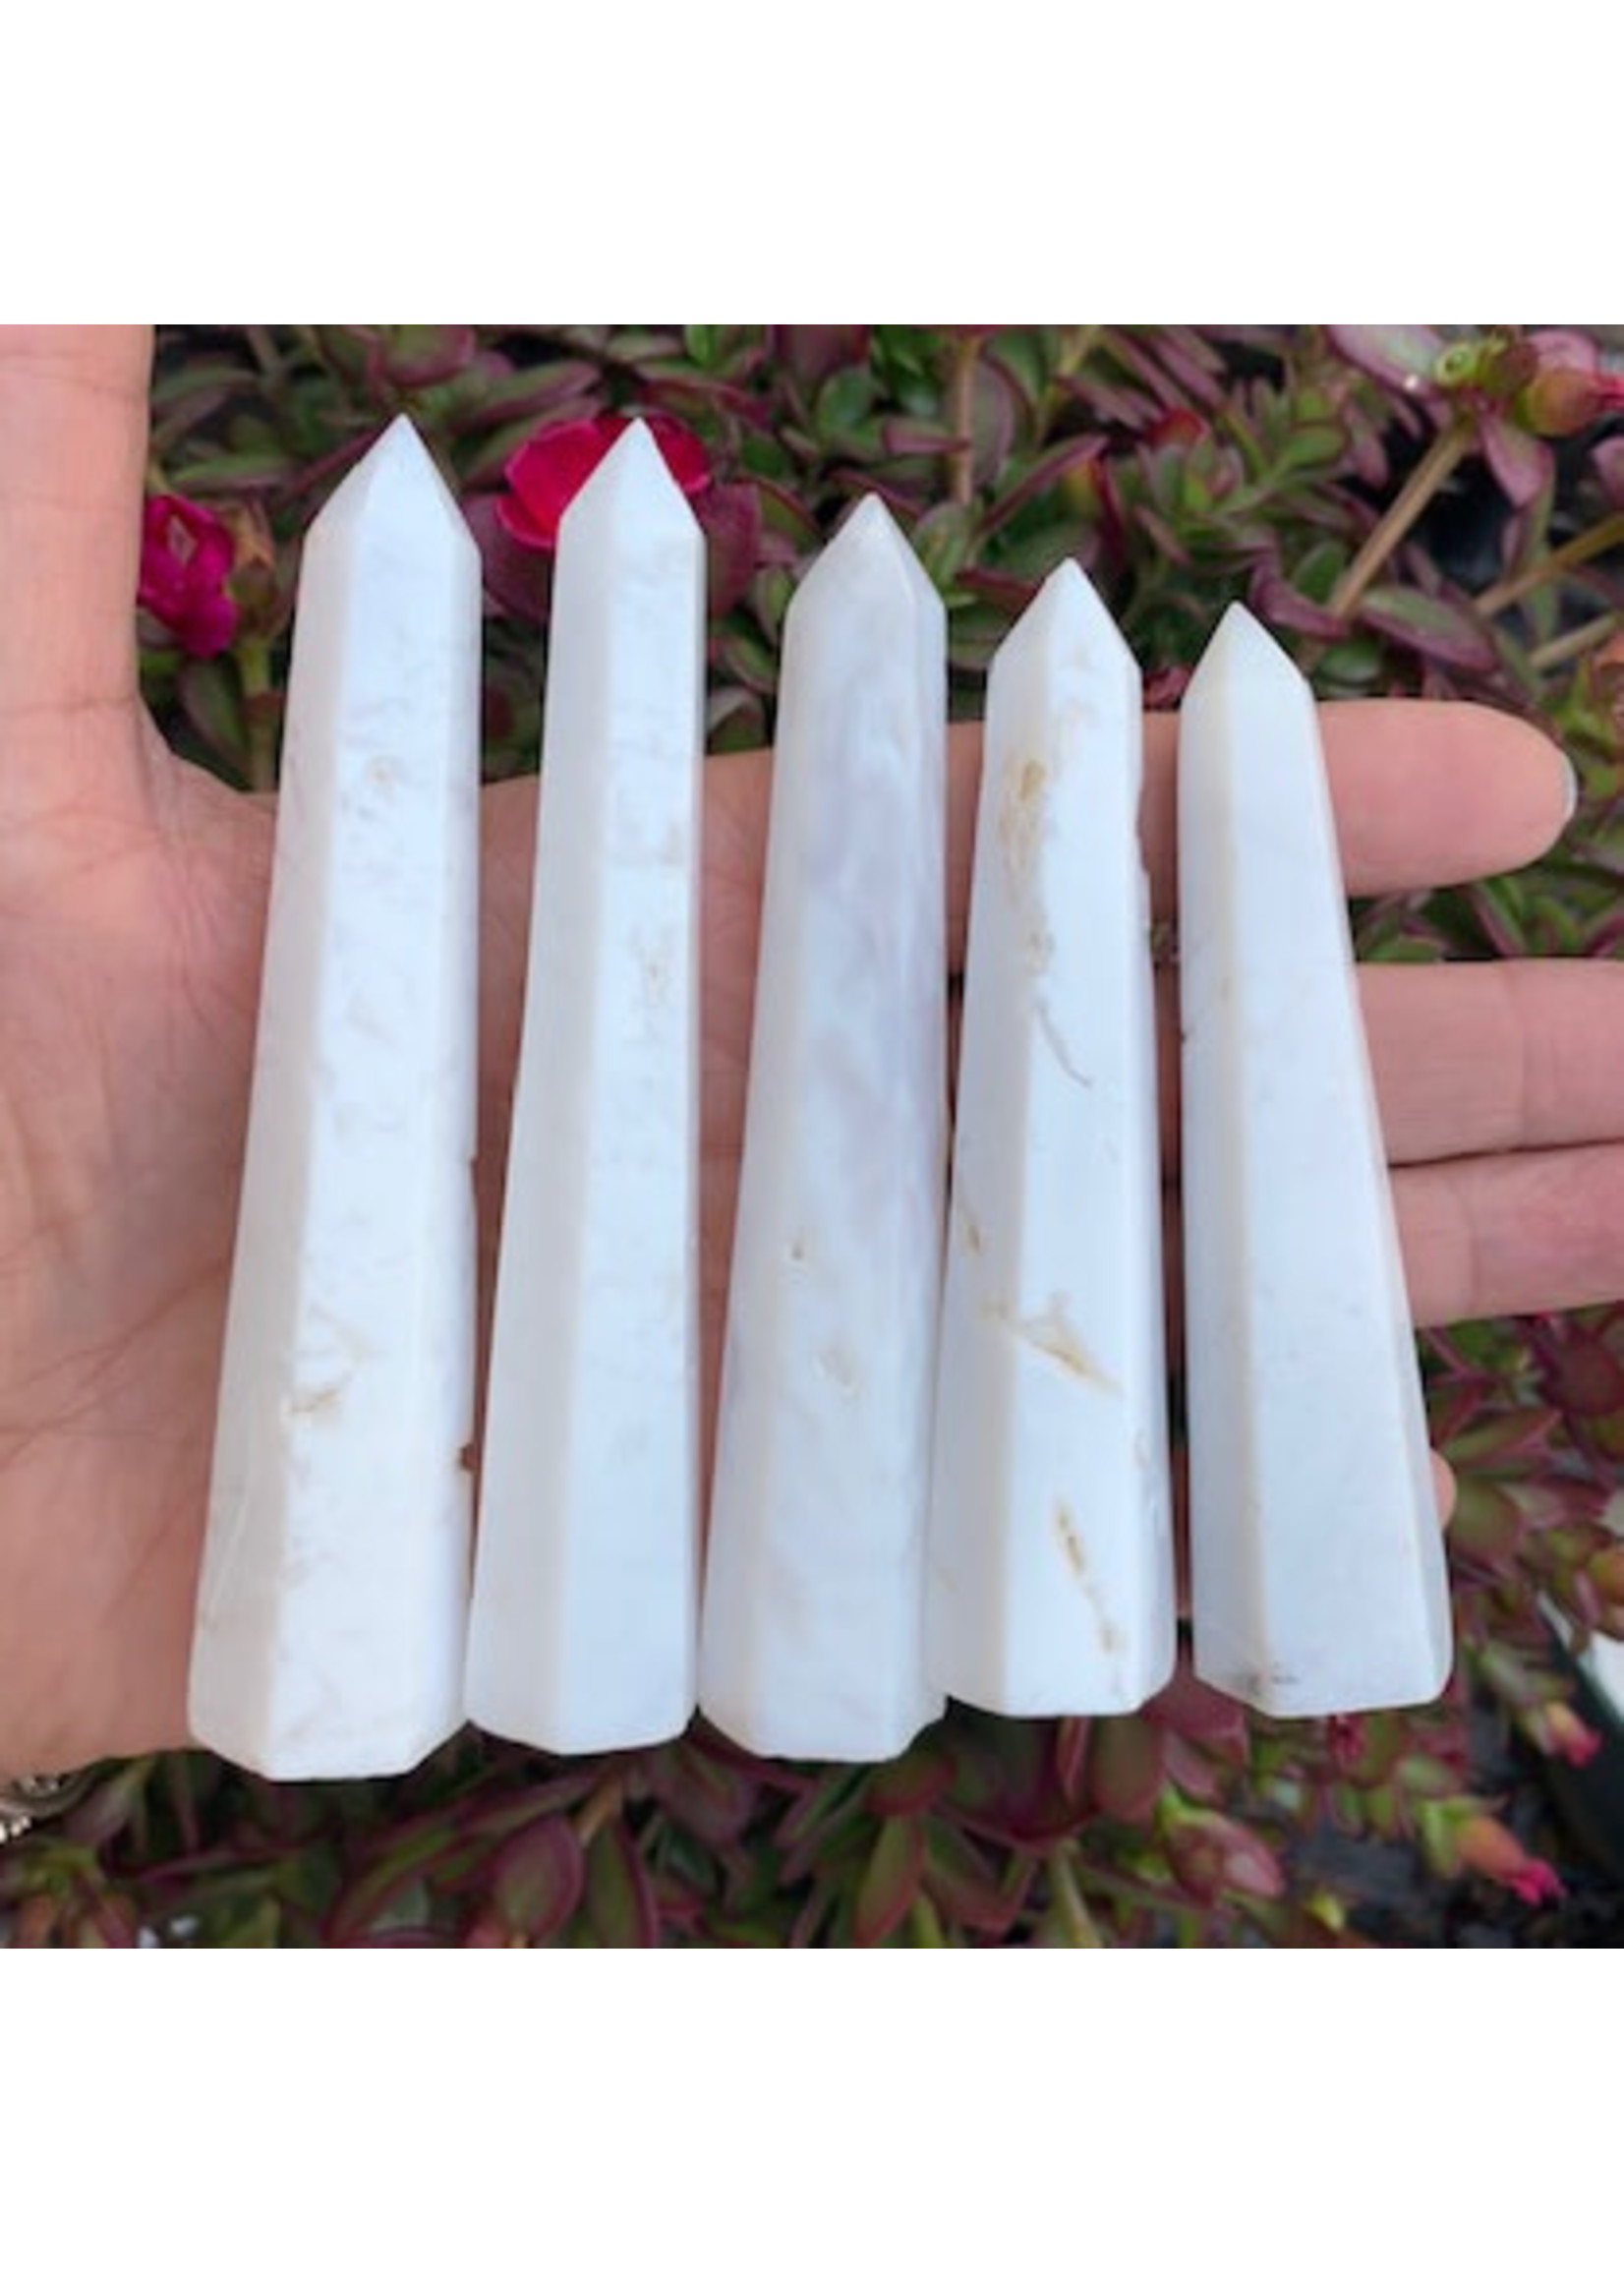 White Agate Generators for purity and light